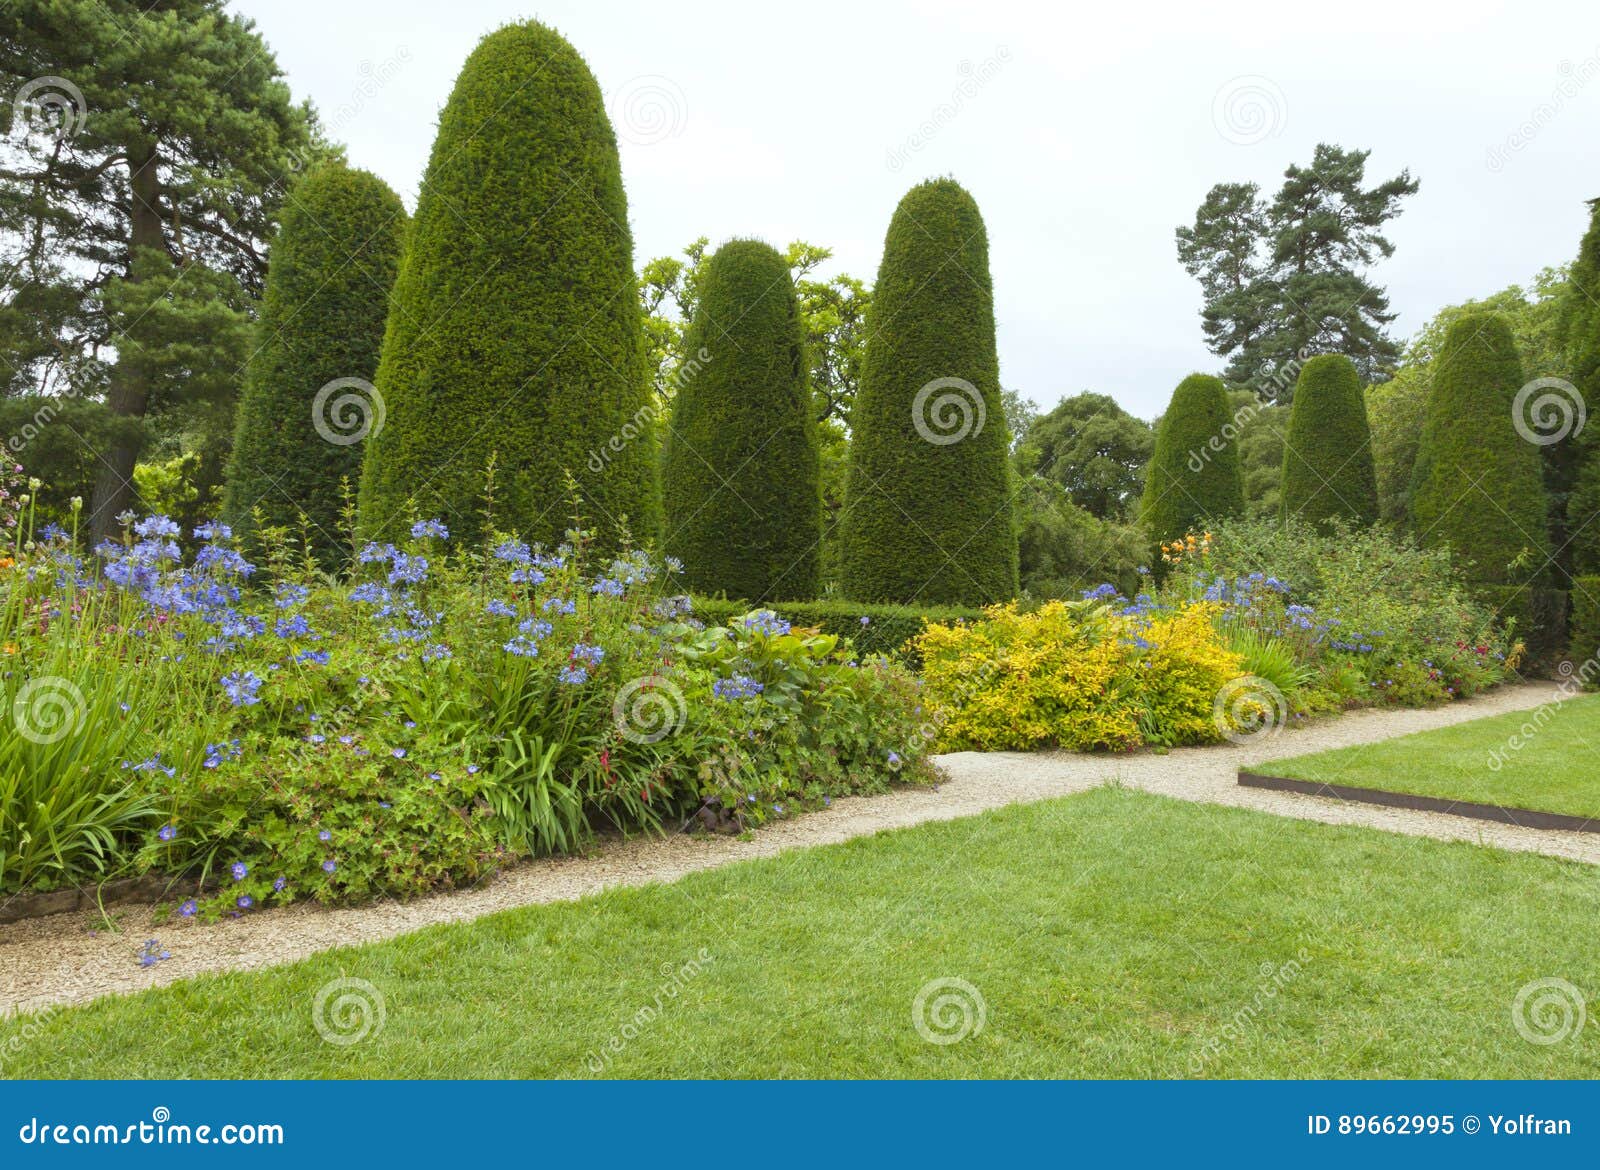 formal english garden with conifer trees, flowerbeds